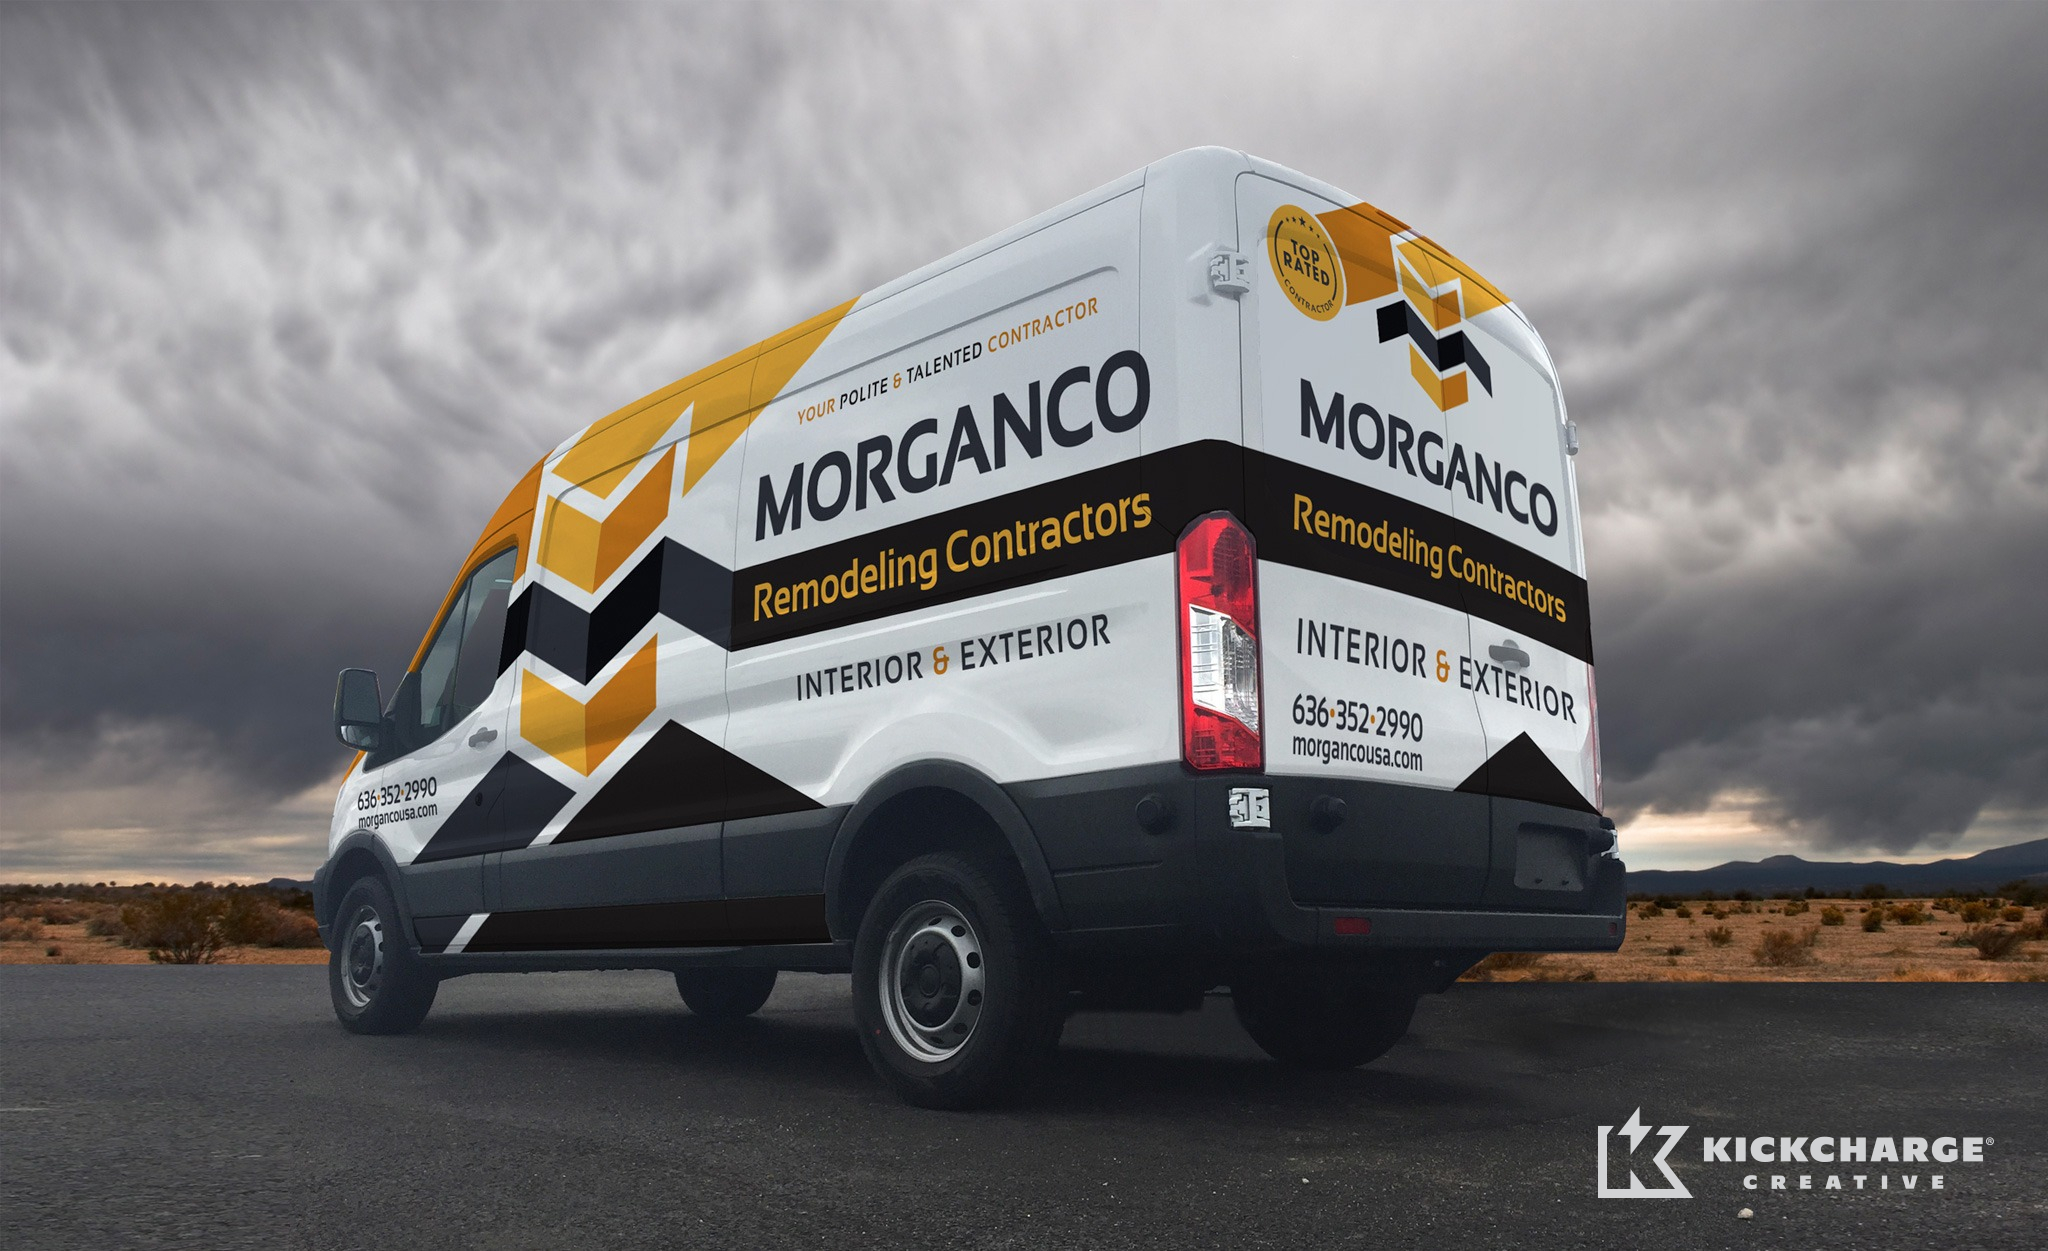 Vehicle wrap design for Morganco Remodeling Contractors. The best vehicle wraps use appealing graphics and easy-to-read fonts, as this wrap for Morganco shows.